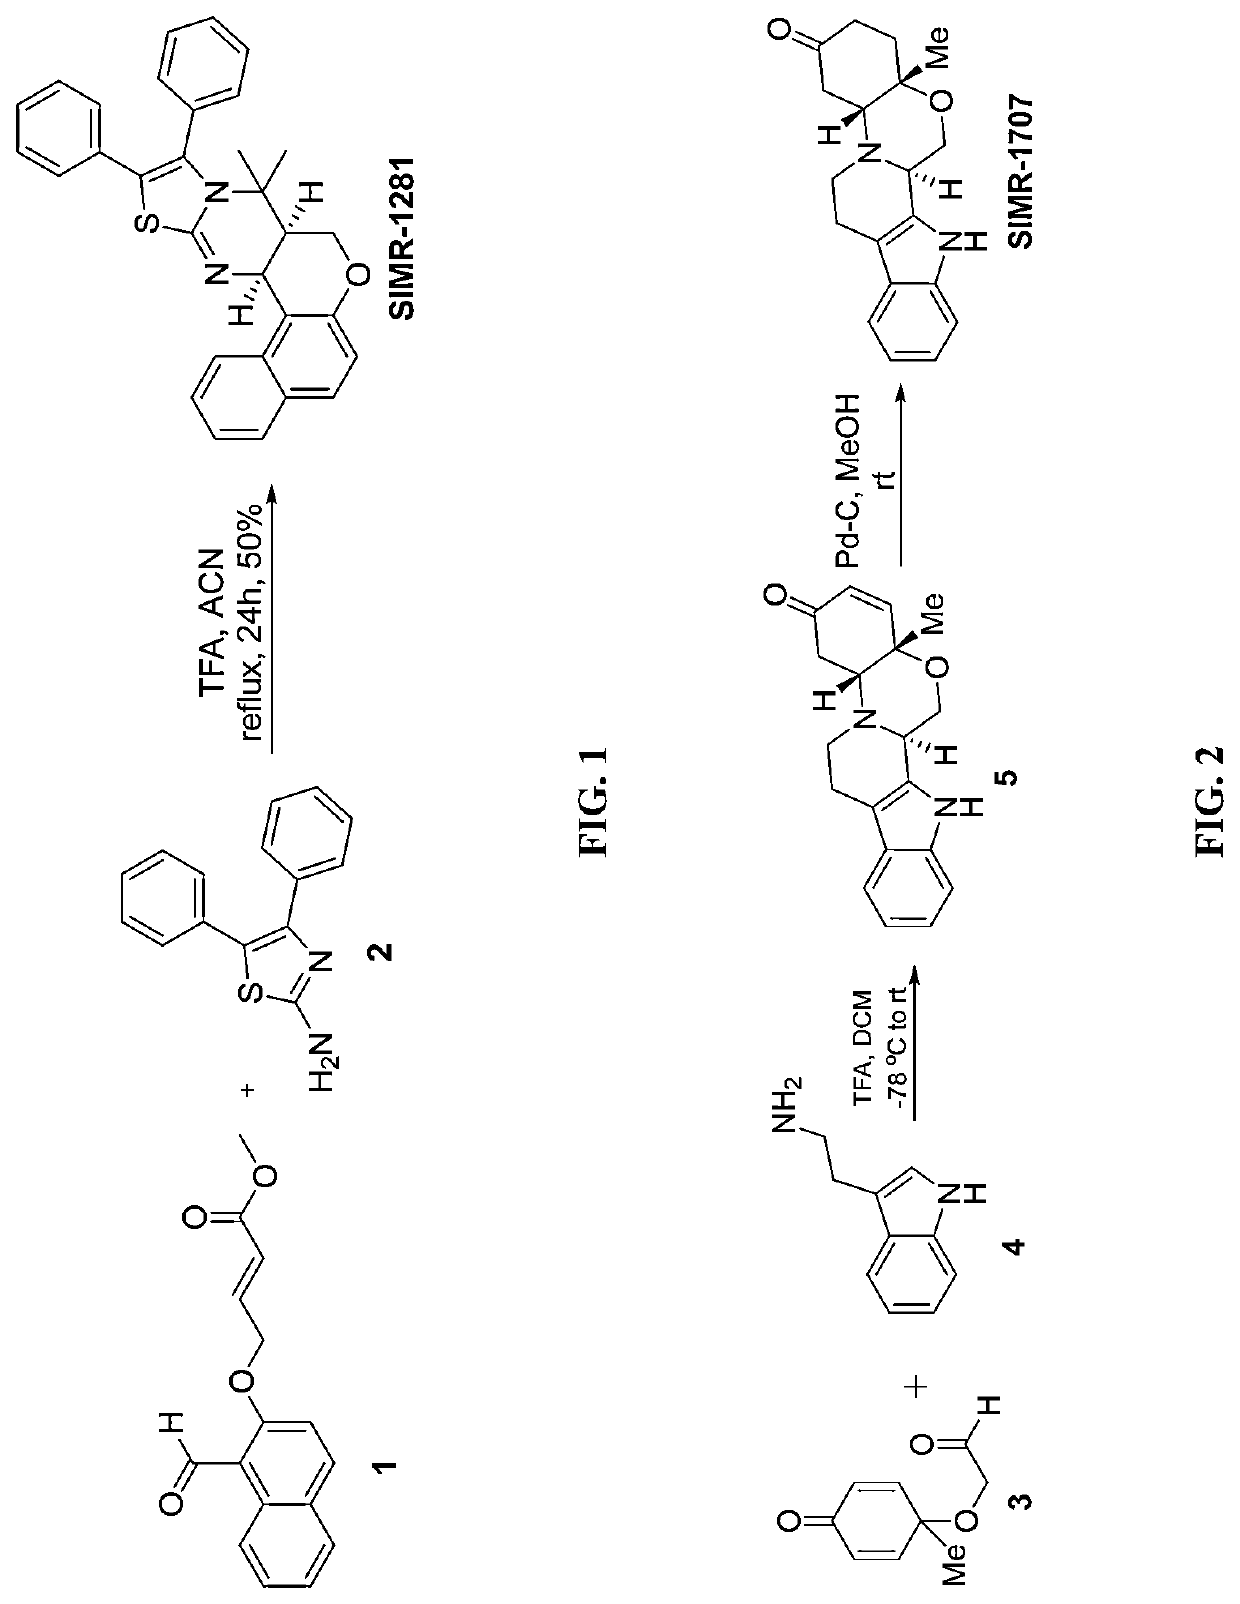 Prevention, Prophylactic and Therapeutic Treatment of Autoimmune Diseases Including Multiple Sclerosis Using Novel Small Molecules and Compositions Thereof